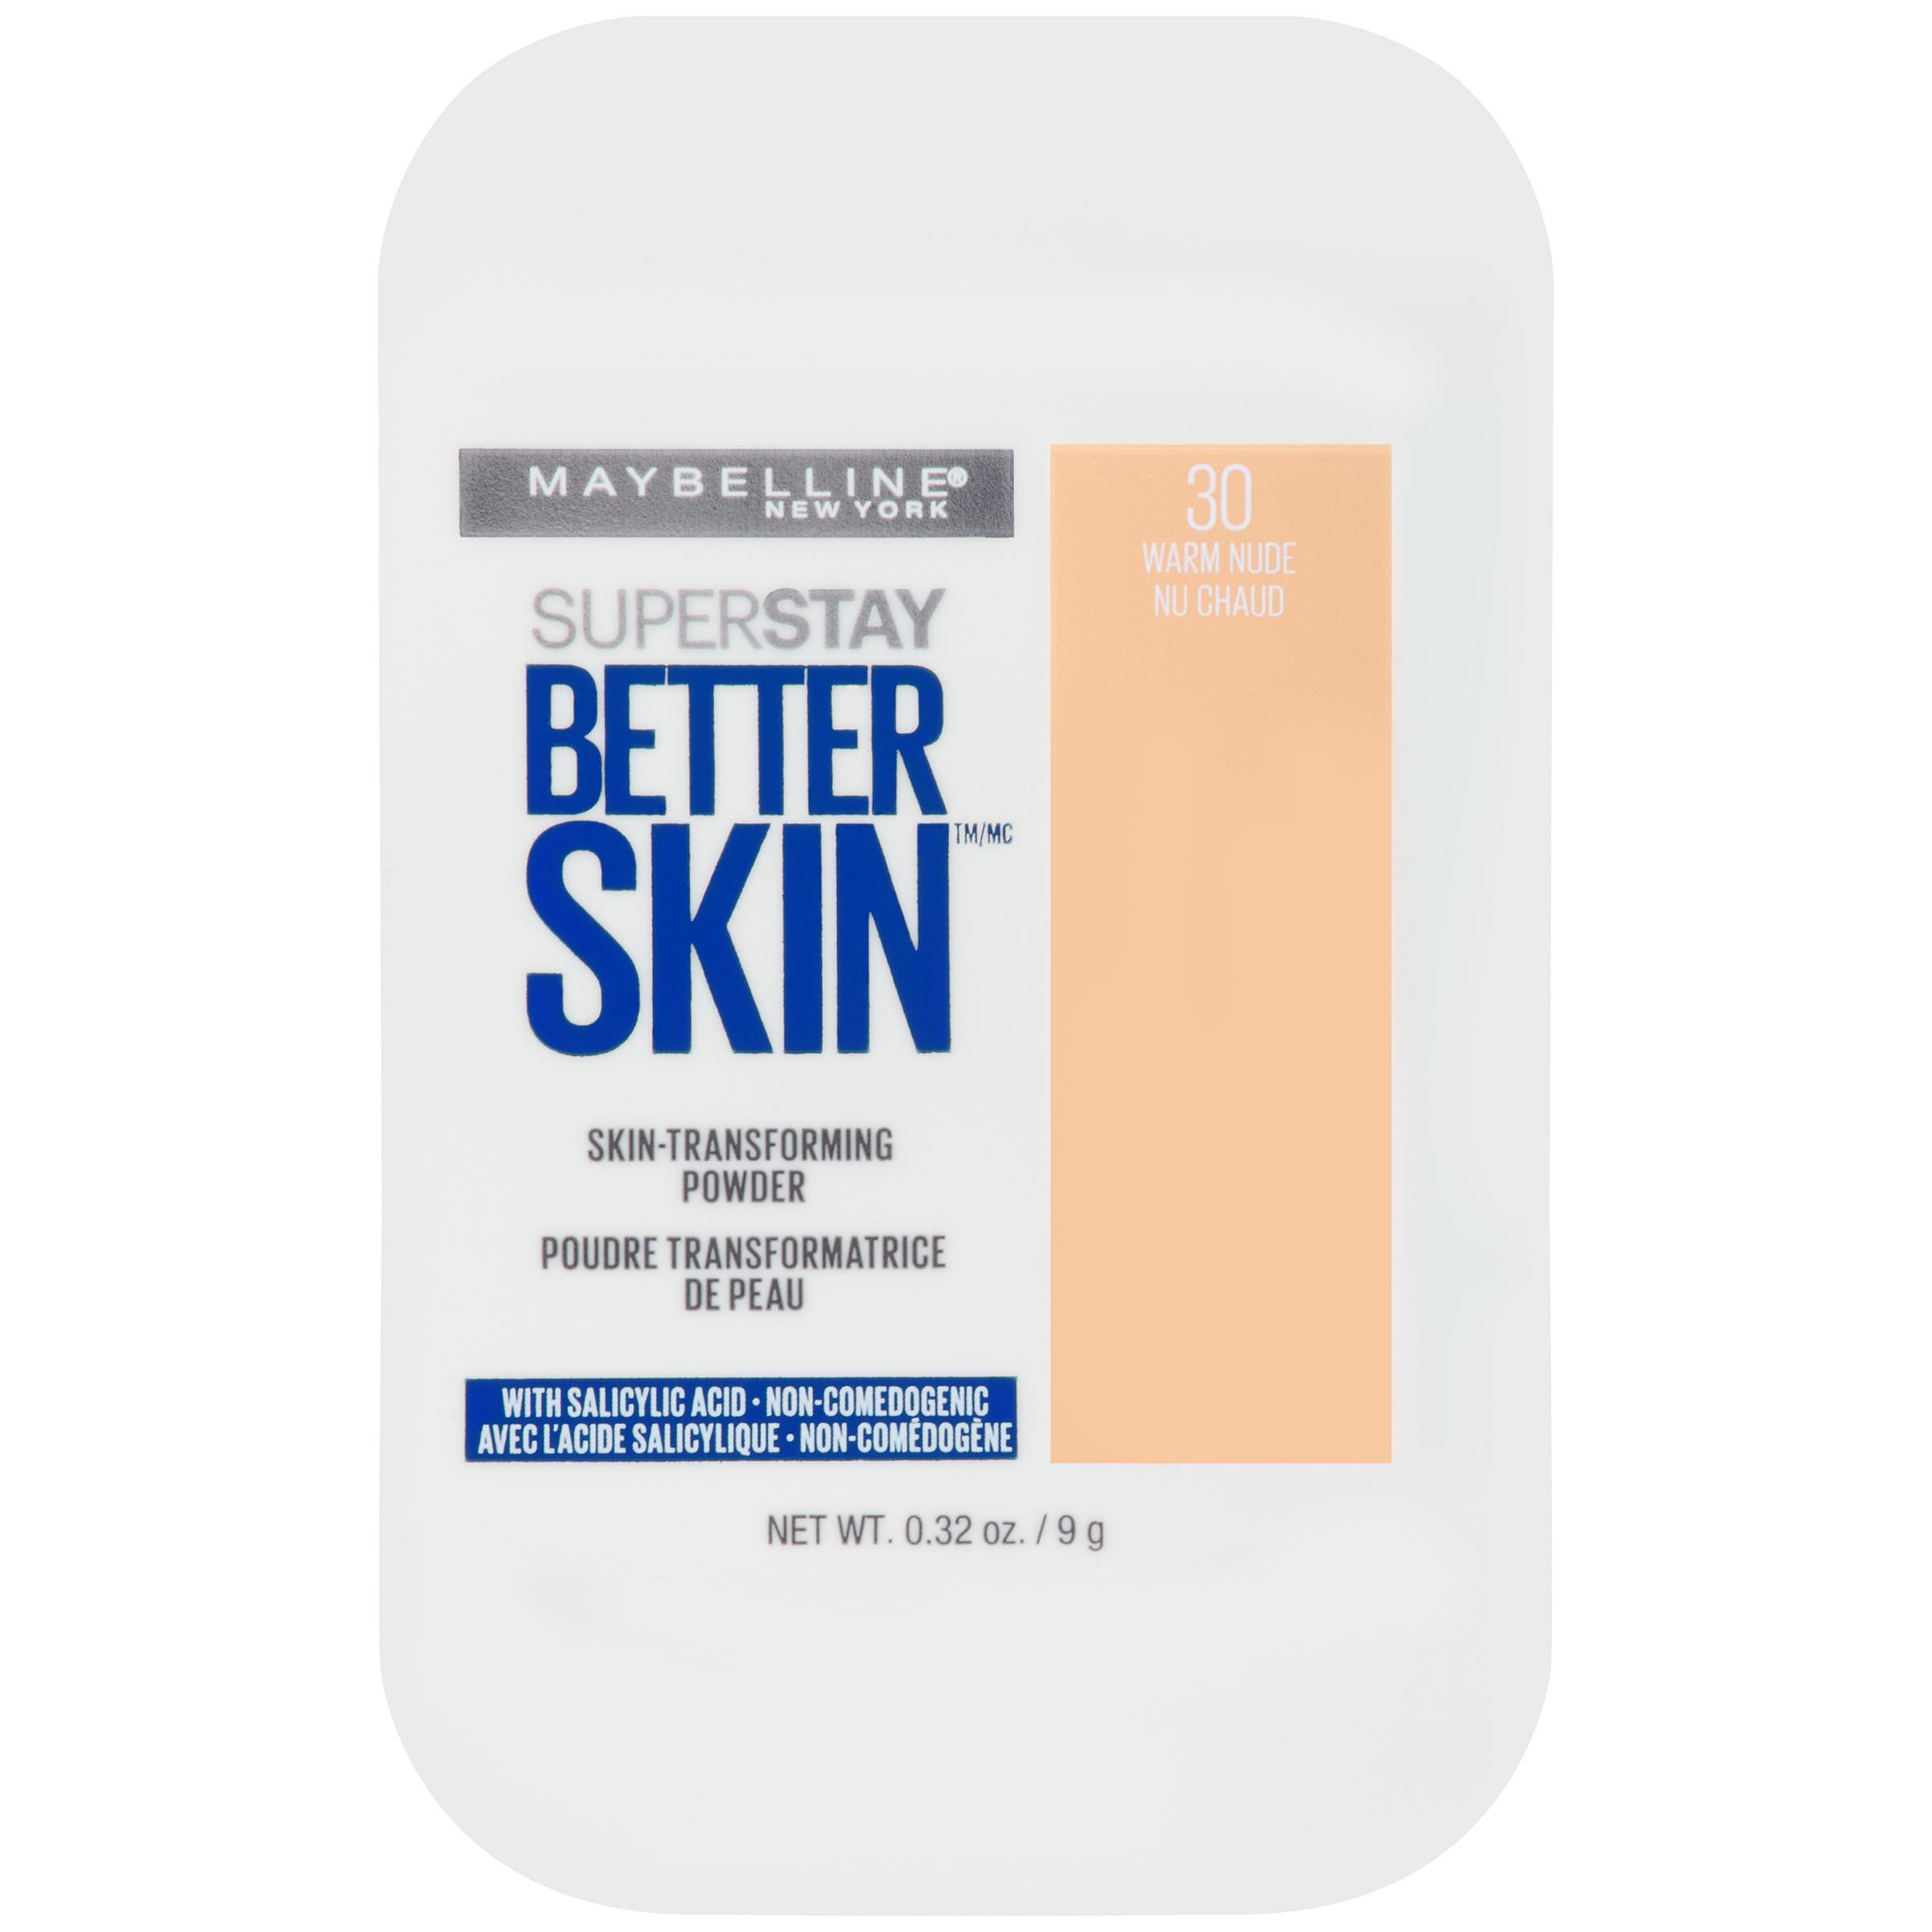 Maybelline Super Stay Better Skin Powder, Warm Nude - image 2 of 4